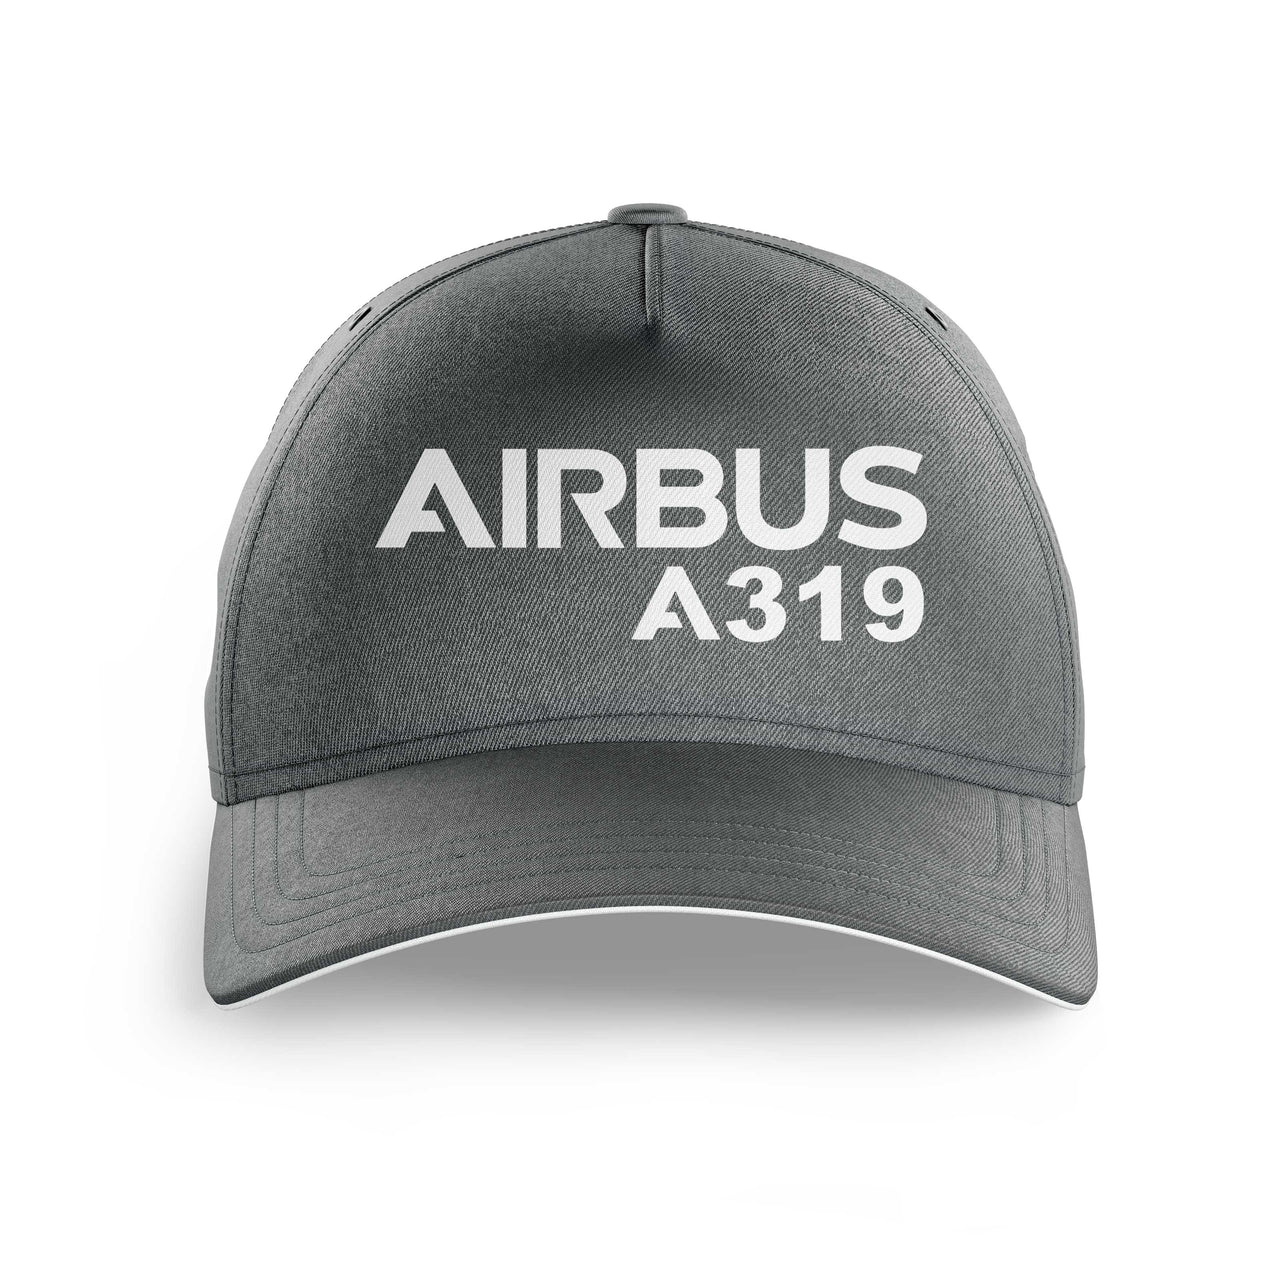 Airbus A319 & Text Printed Hats